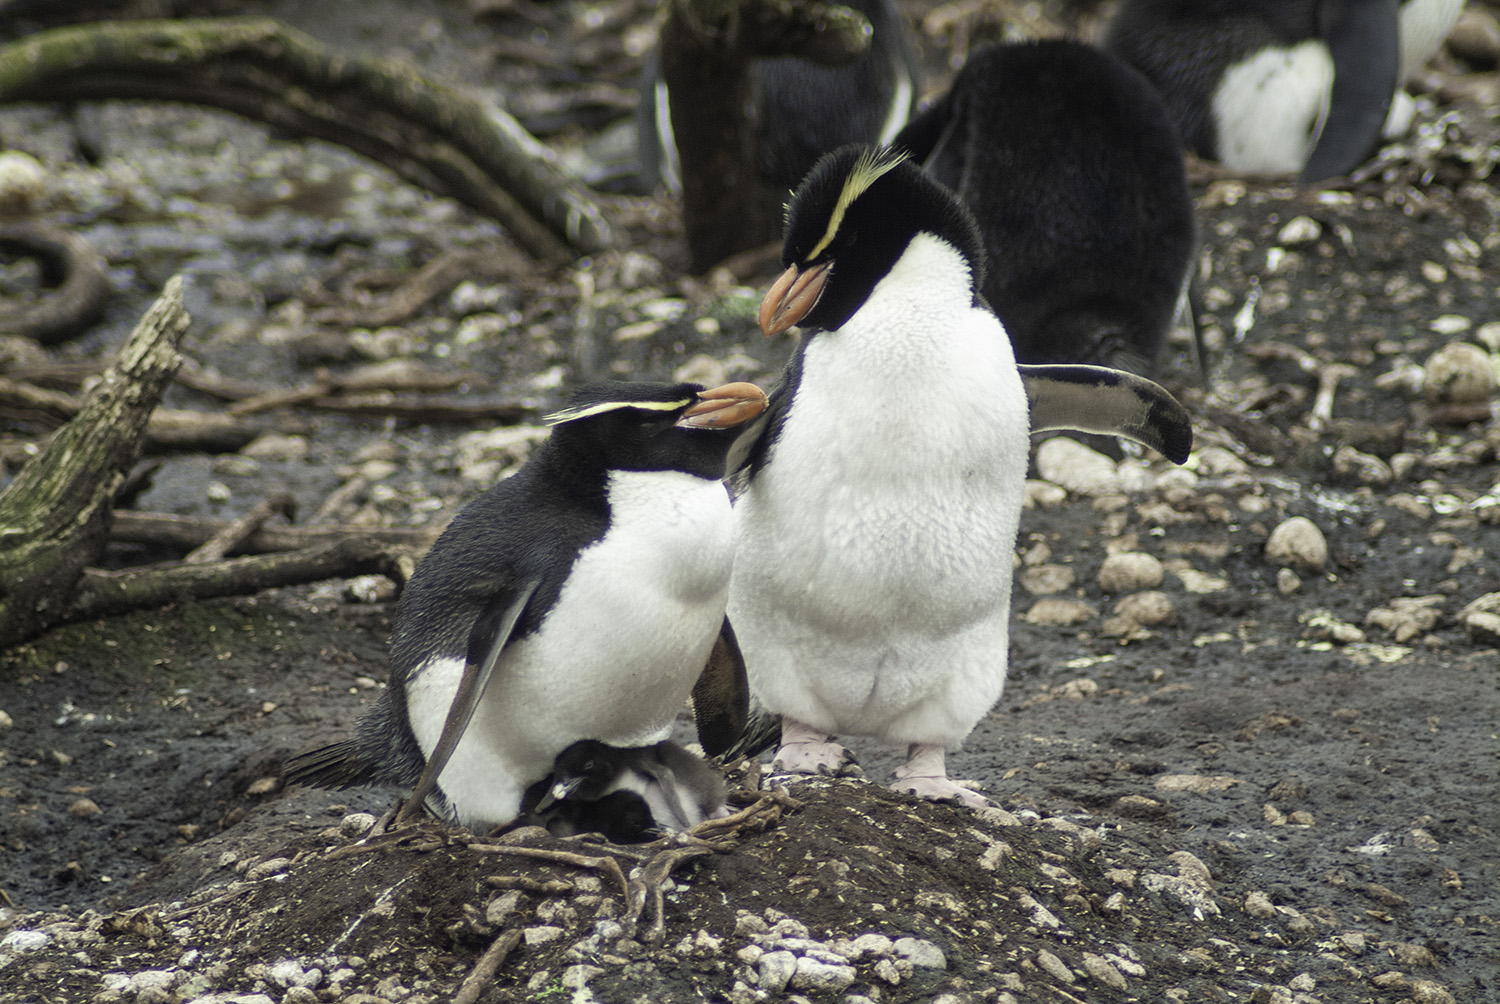 Figure 3. Snares penguin nest with the female incubating two chicks with the male attending (Photo: Thomas Mattern).